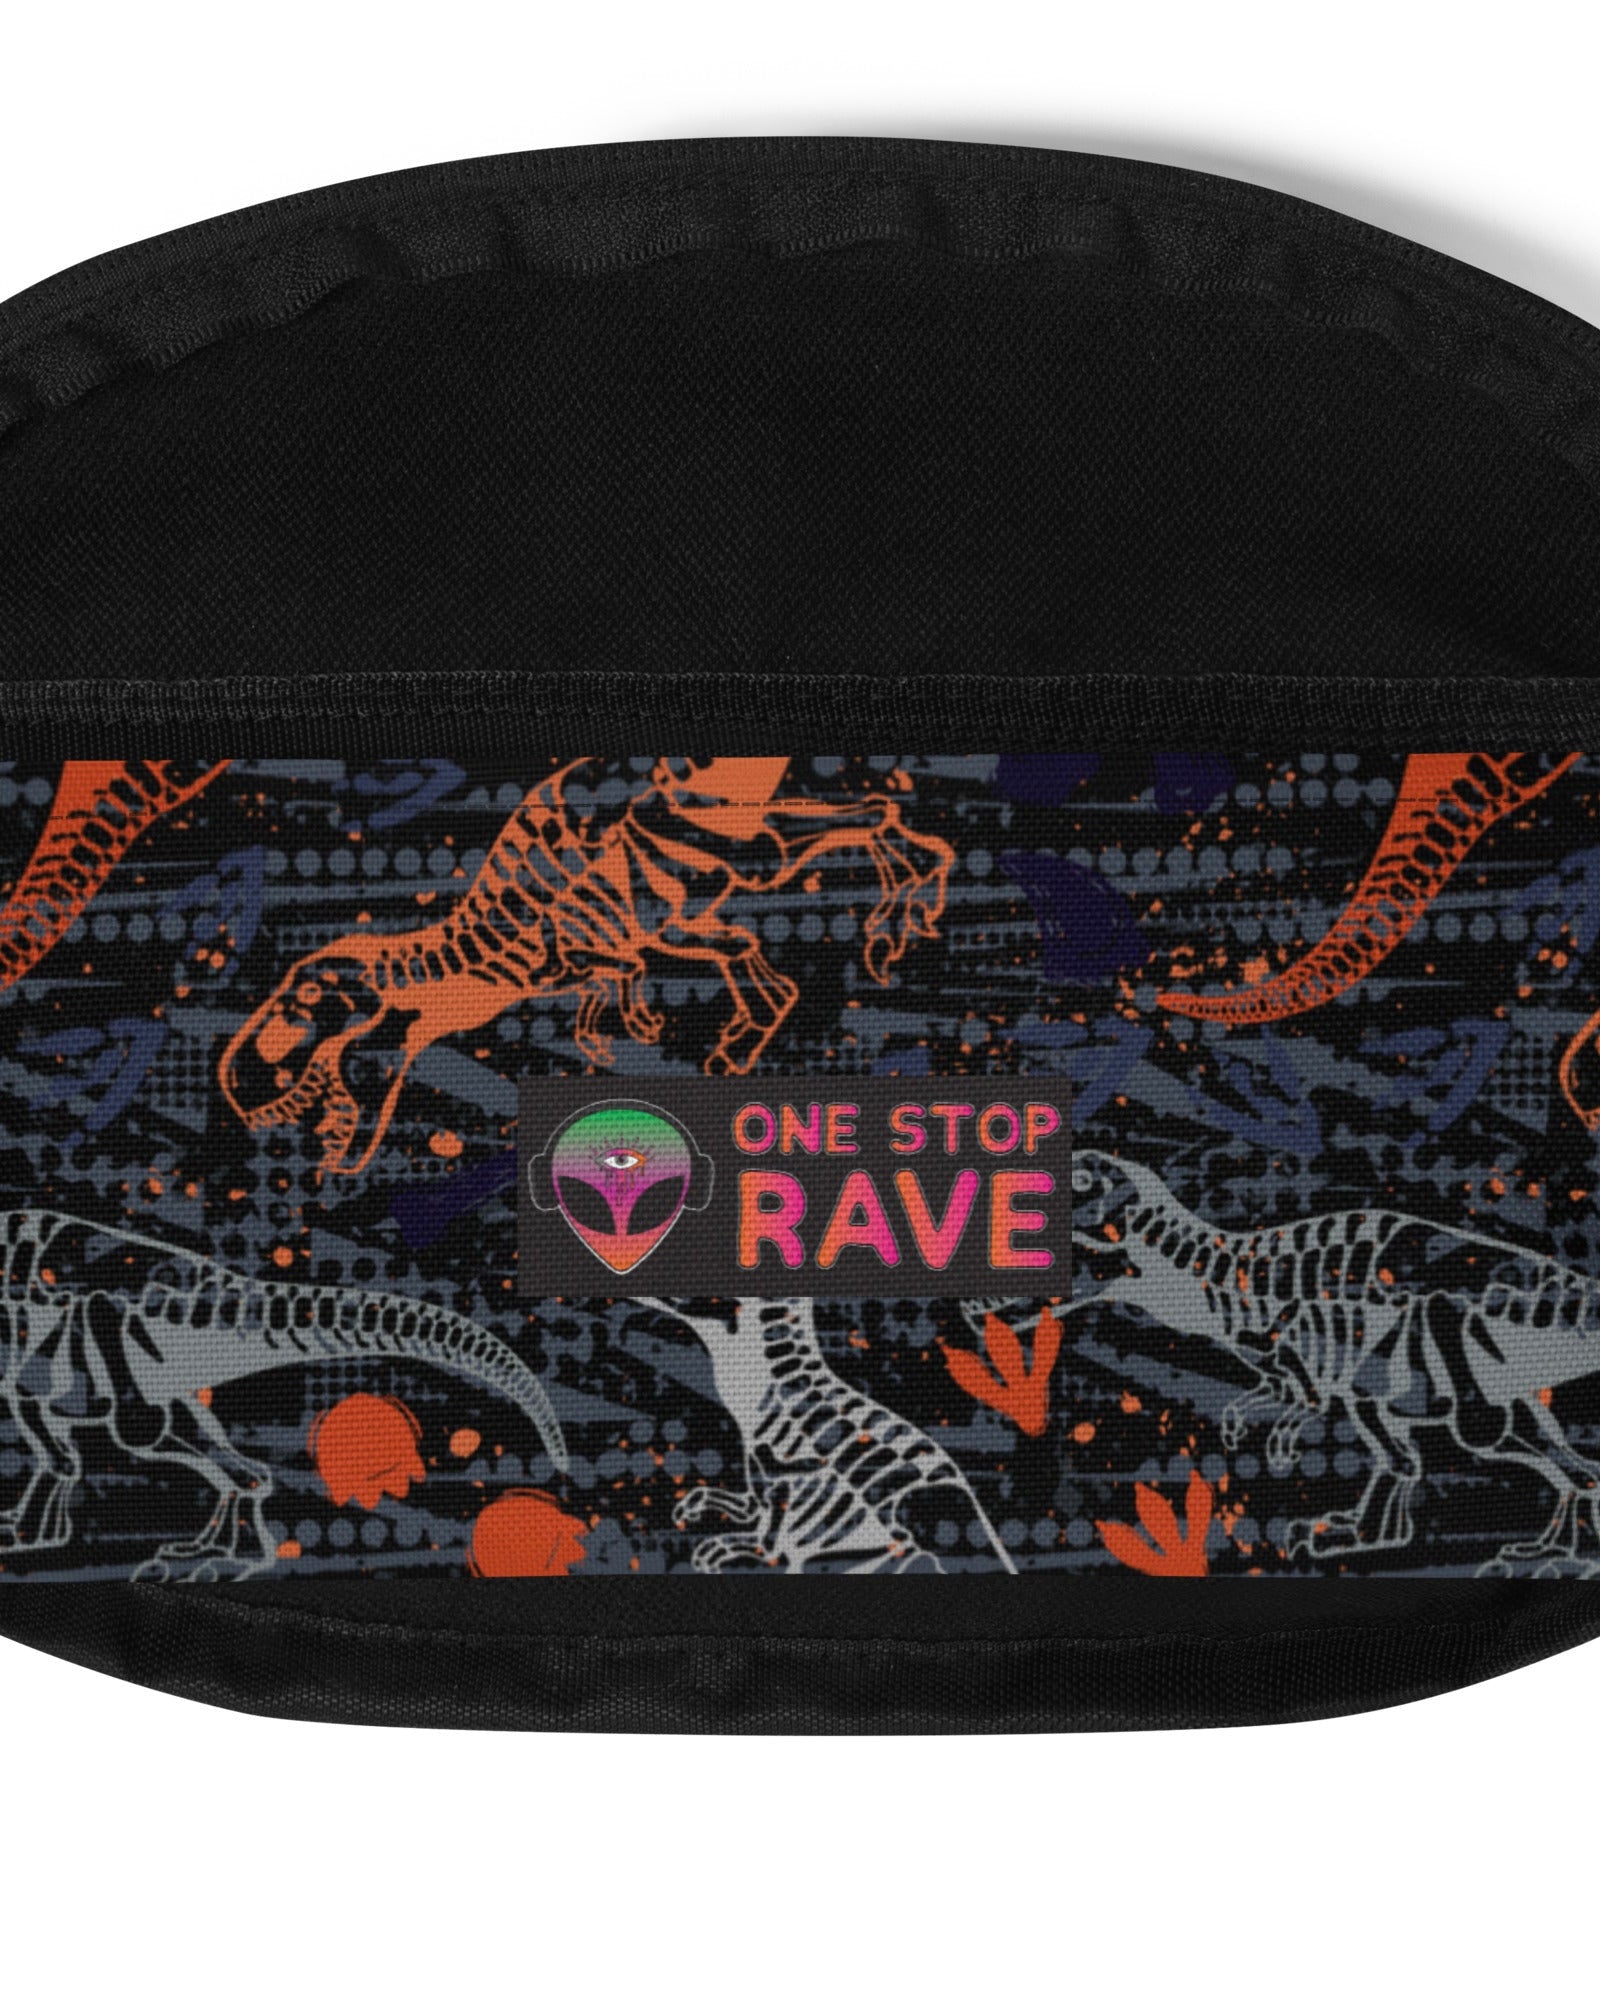 The inner pocket of One Stop Rave's T-Wrecked Fanny Pack